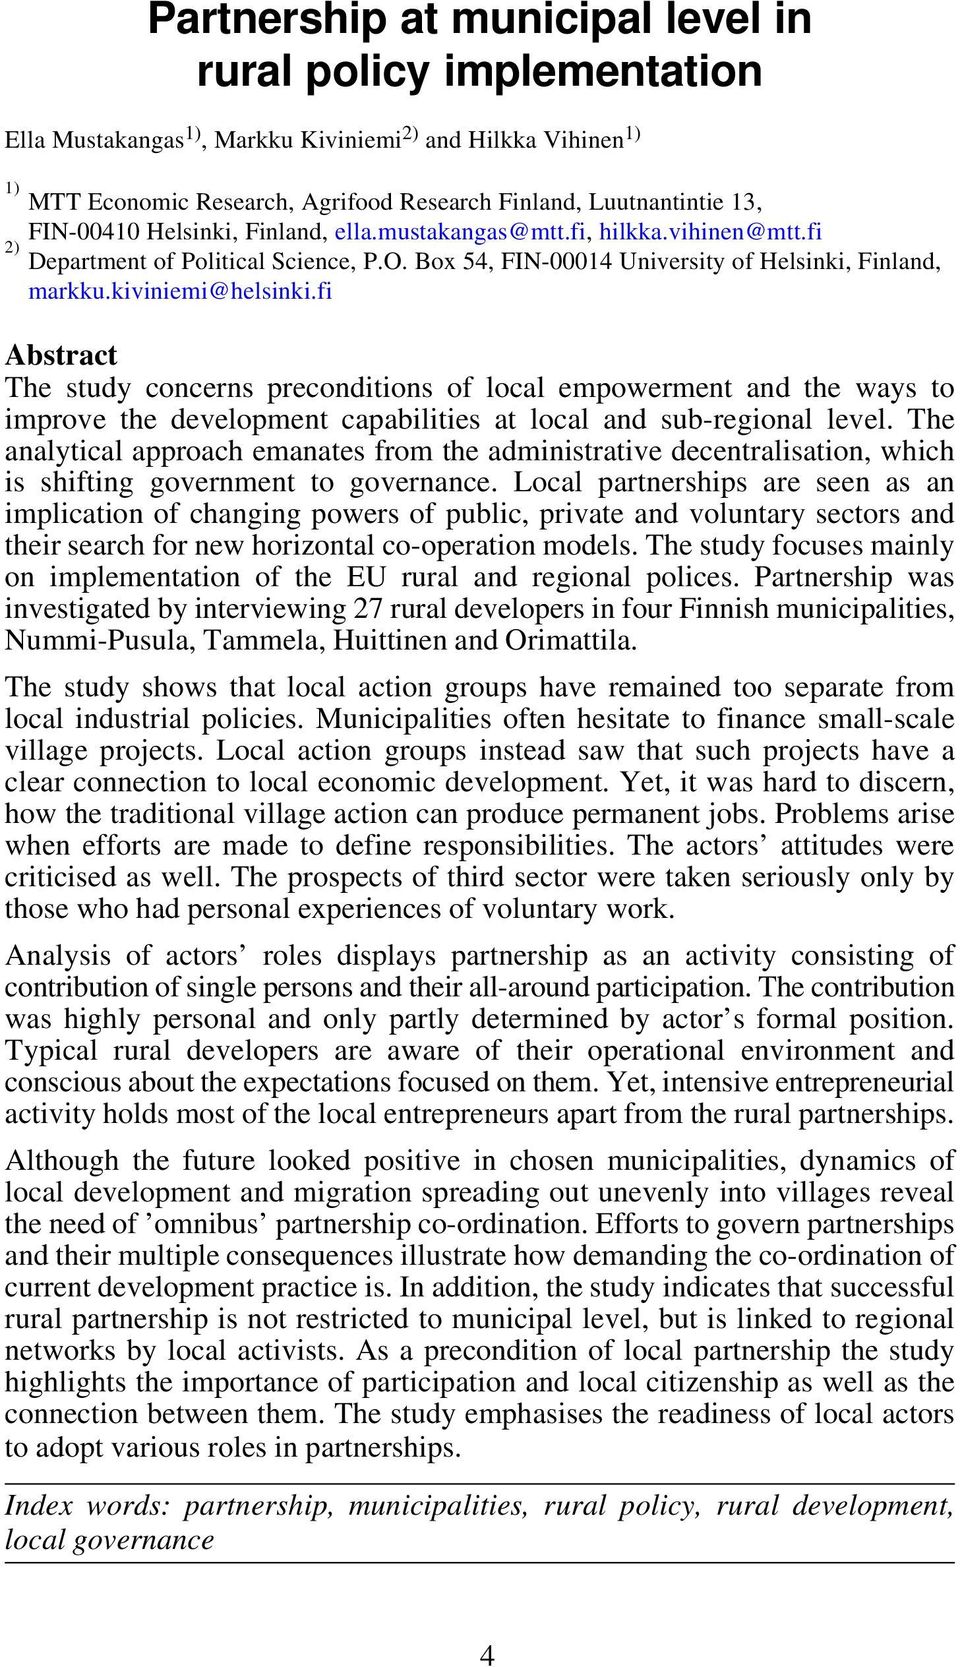 fi Abstract The study concerns preconditions of local empowerment and the ways to improve the development capabilities at local and sub-regional level.